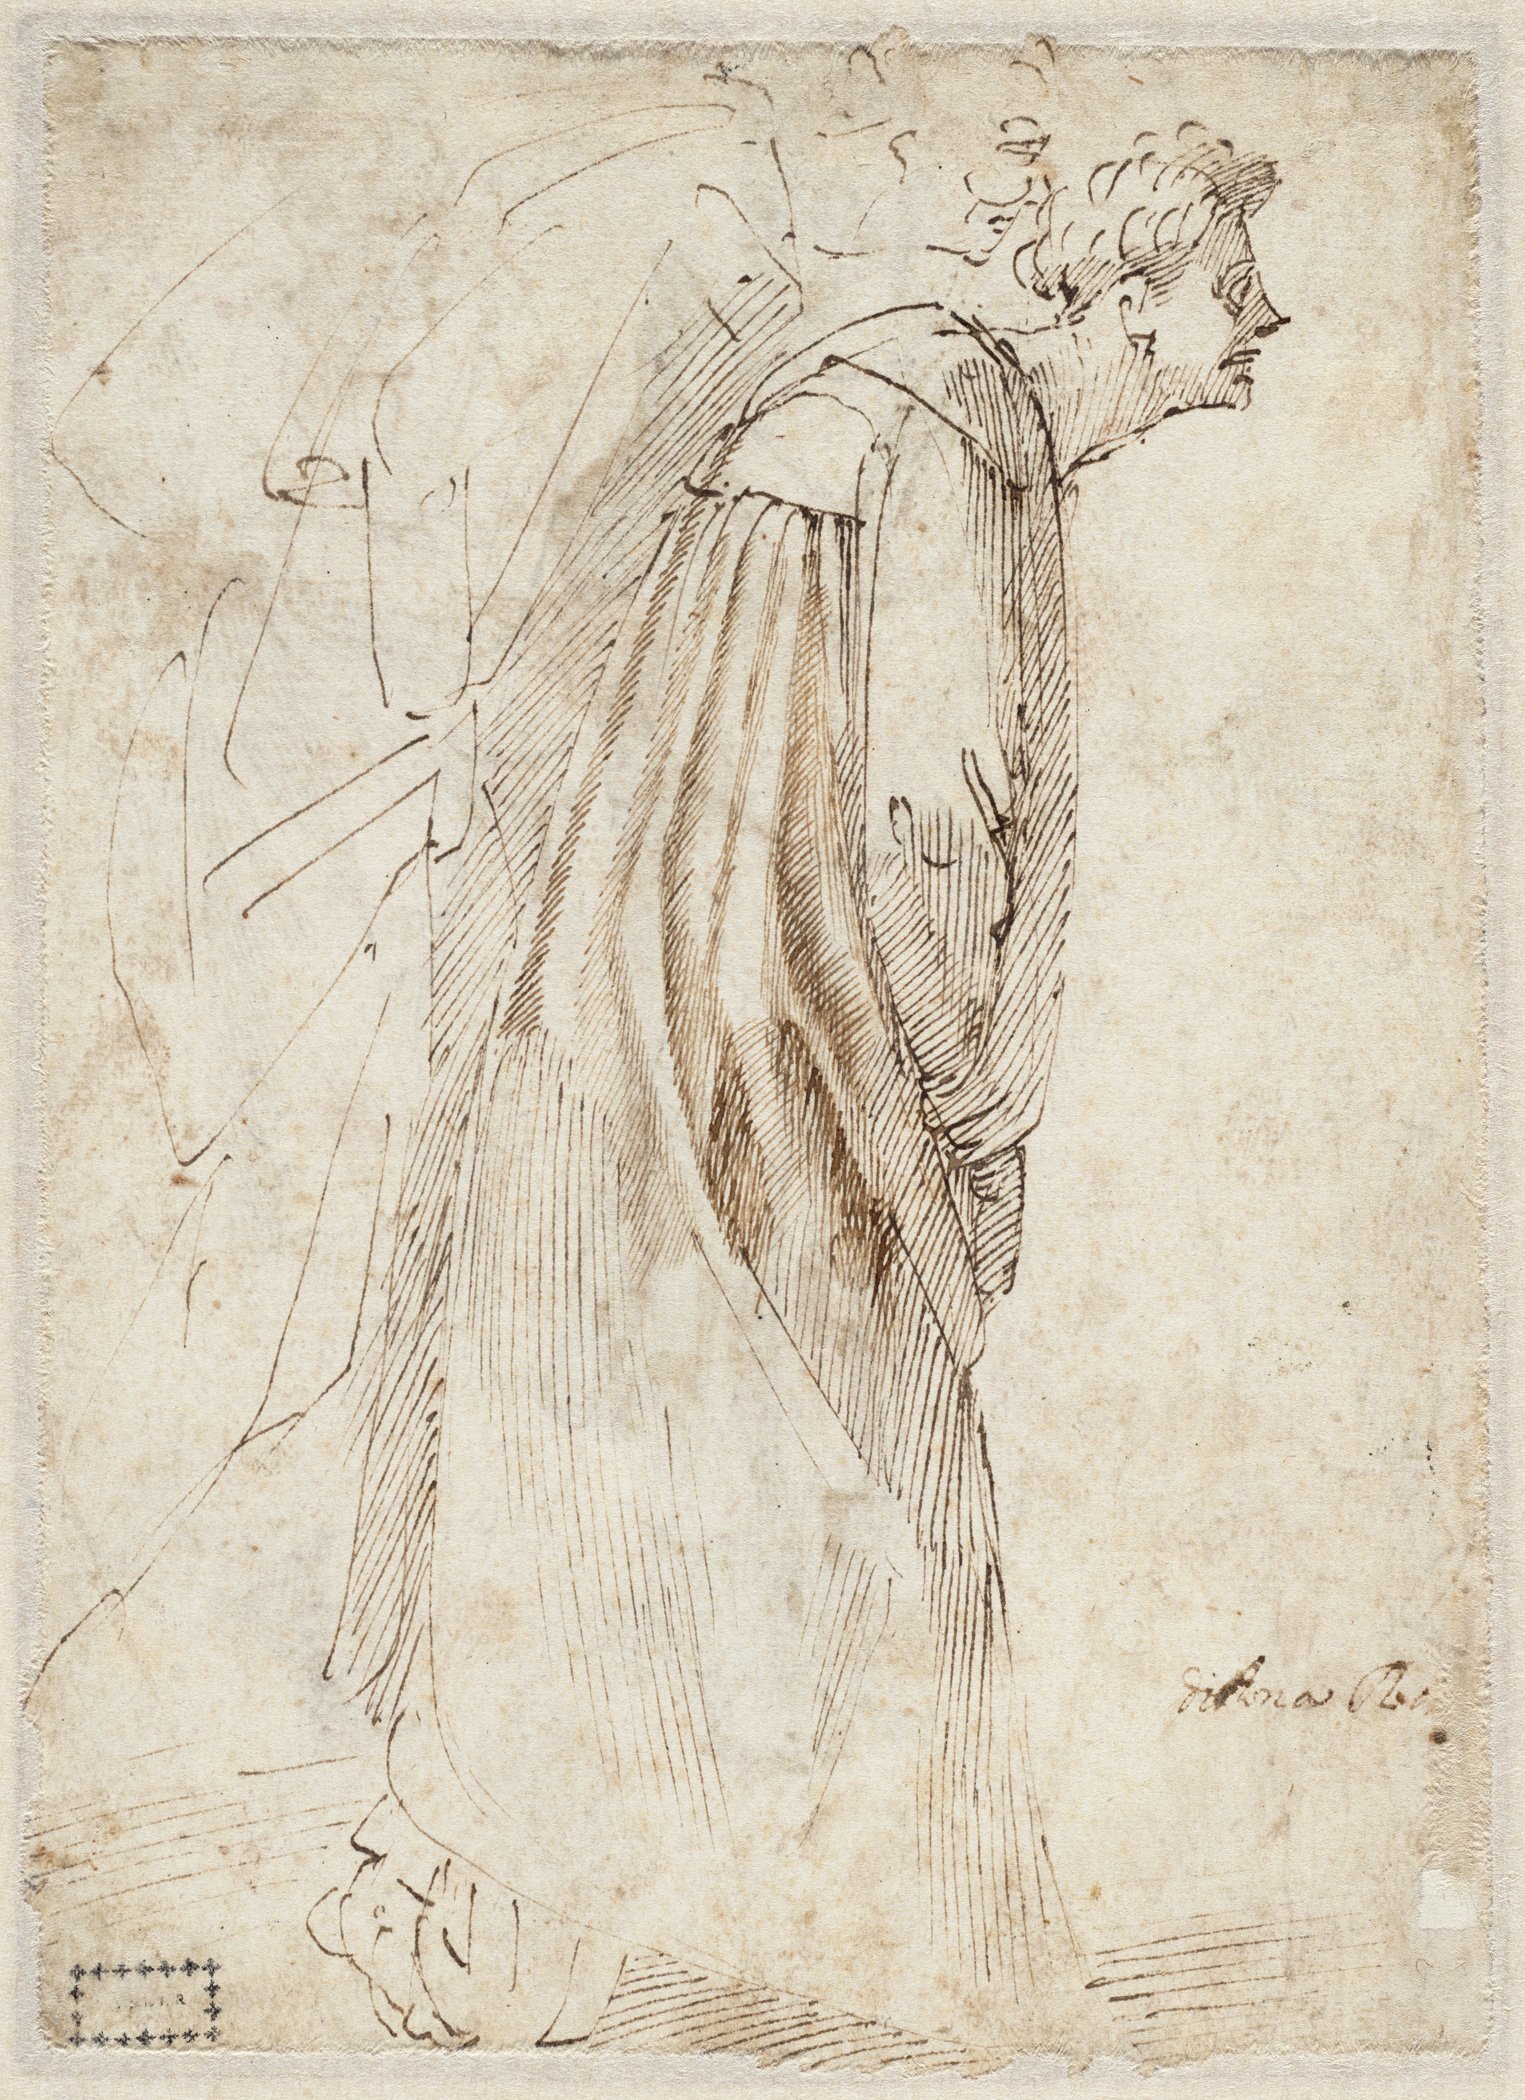 See 46 Extraordinary Michelangelo Drawings That Were Missing From the